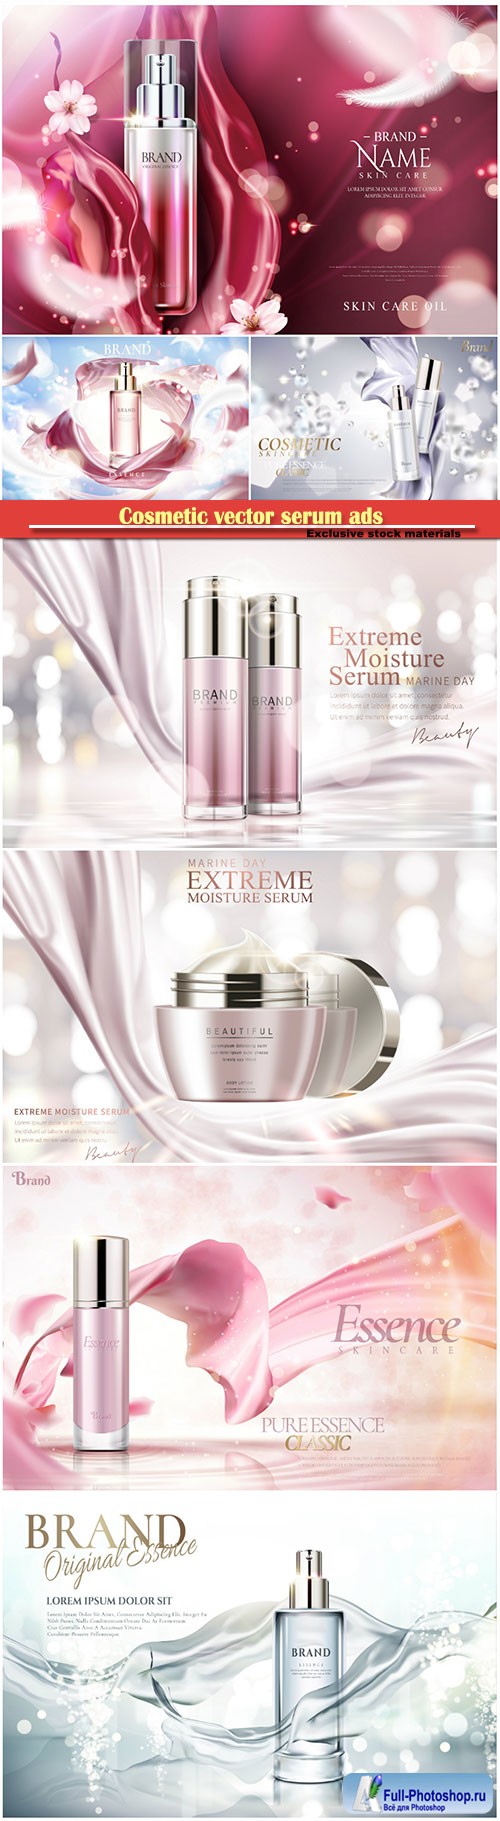 Cosmetic vector serum ads, cosmetic spray, cosmetic cream  in 3d illustration